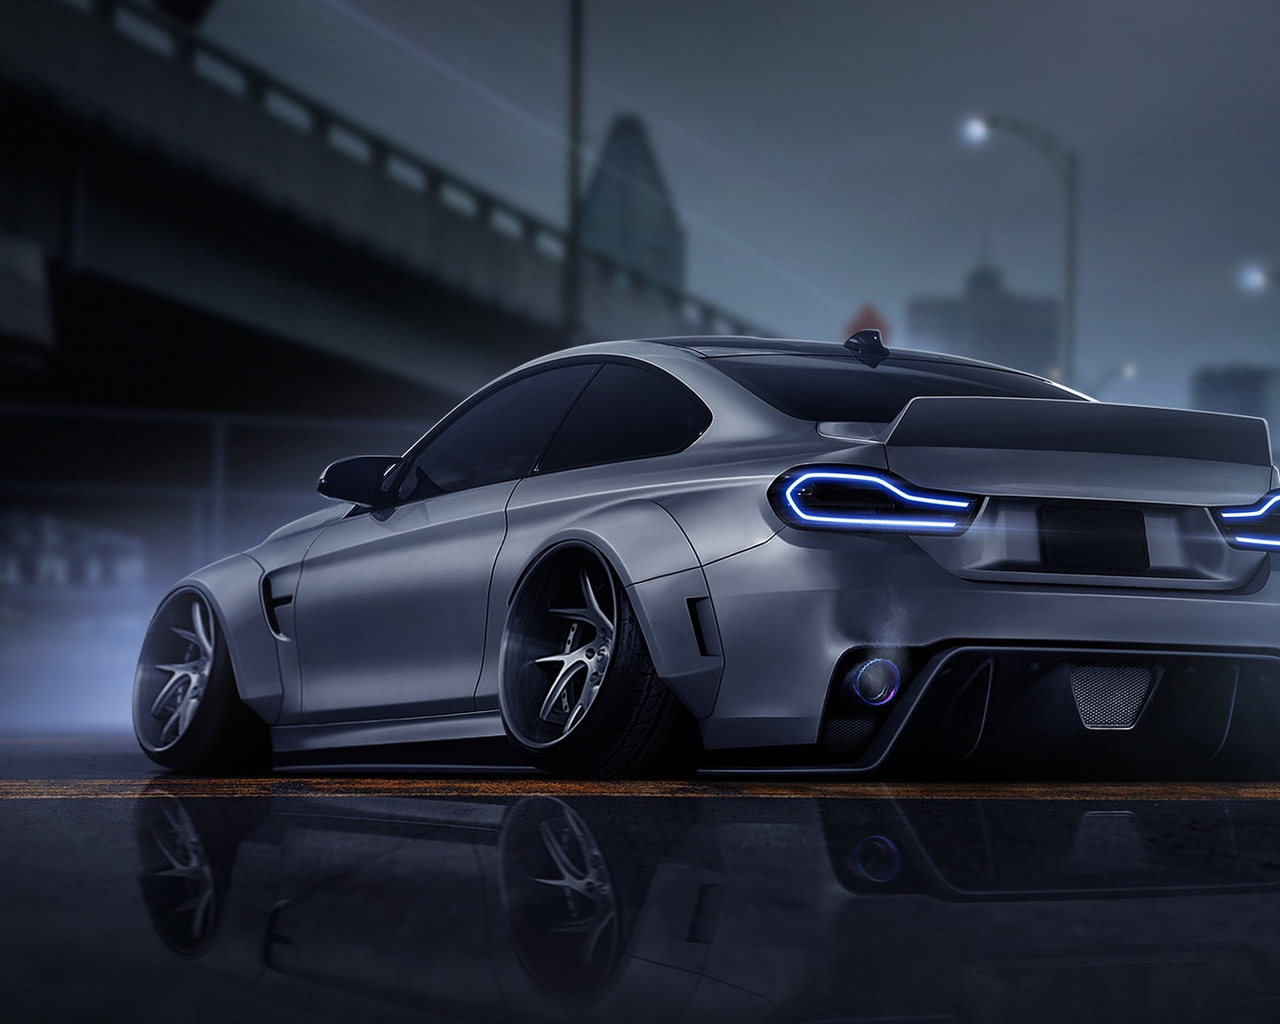 Download Bmw, Auto, Automobile, Gray, Gray, Art, Coupe, Rendering, M Dark, Side Wallpaper in 1280x1024 Resolution